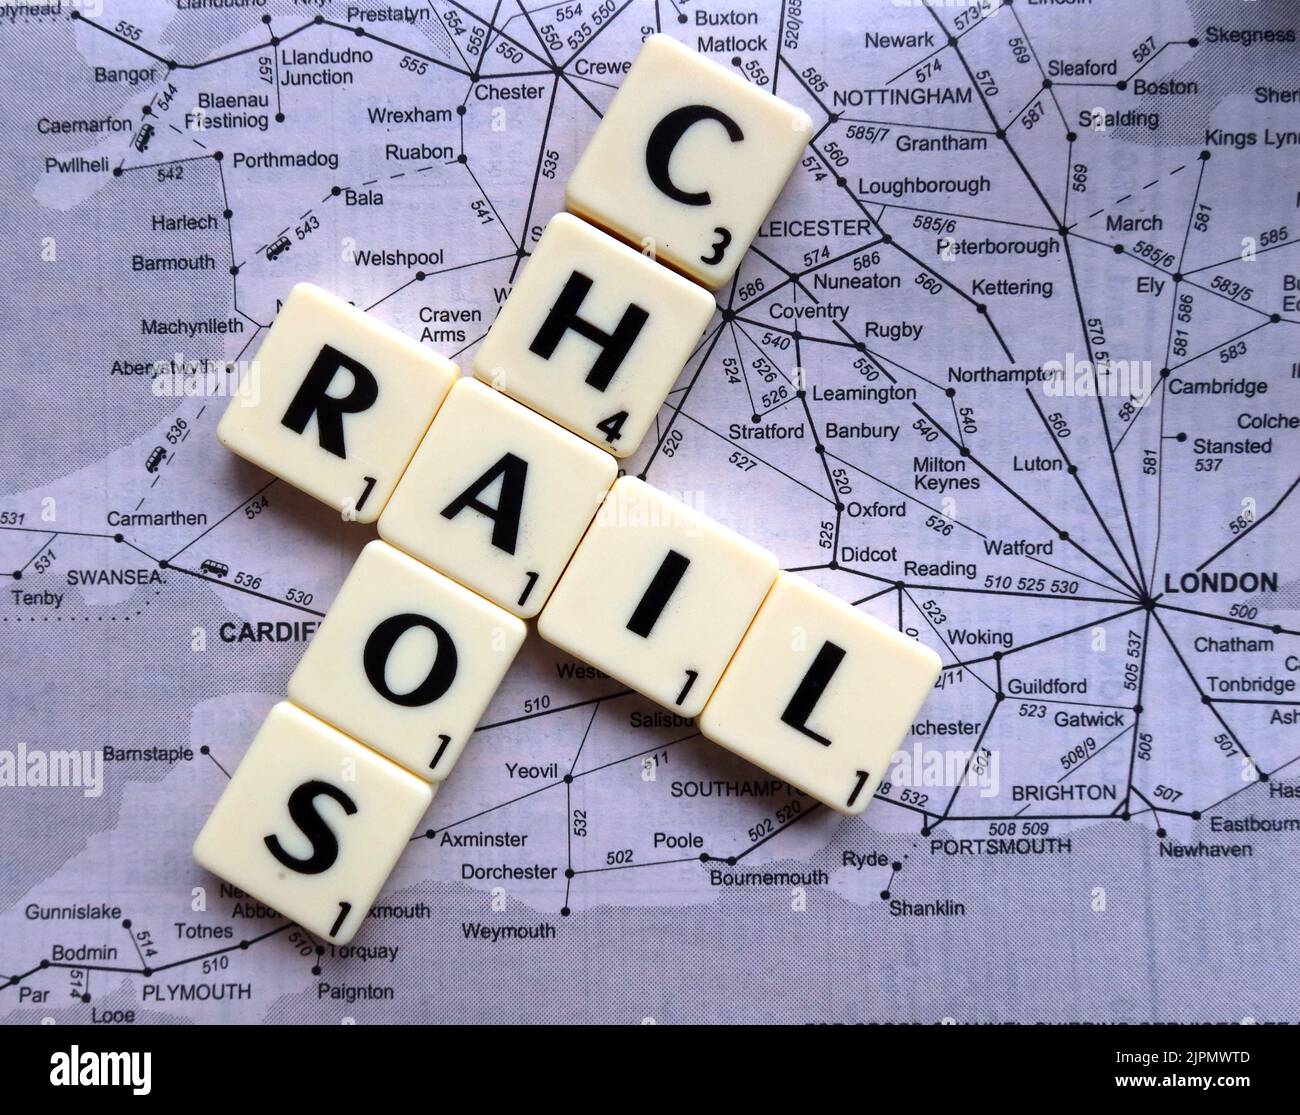 Rail chaos caused by delays, cancellations, strikes and industrial action, across the British train transport network - RMT, ASLEF in Scrabble letters Stock Photo